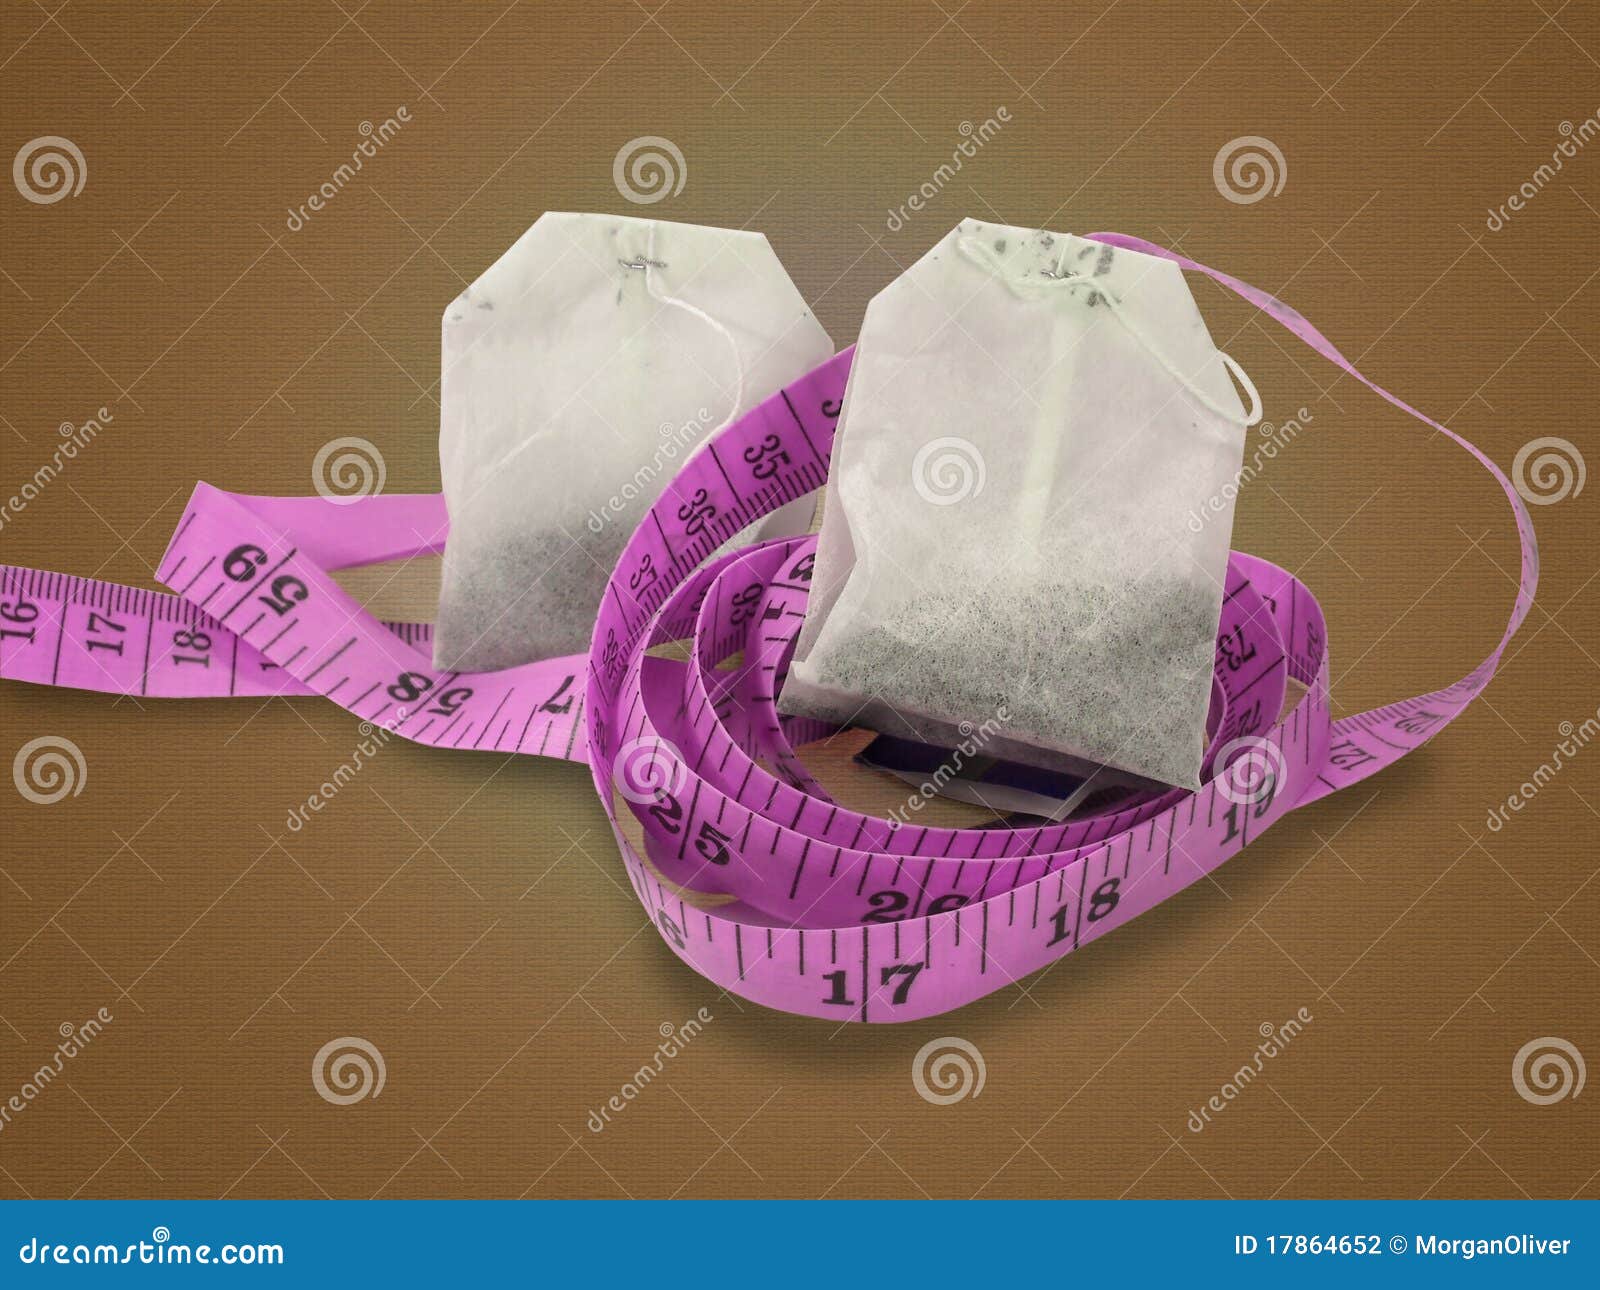 Two Herbal Tea Bags Nestled On Top Of A Pink Measuring Tape Isolated